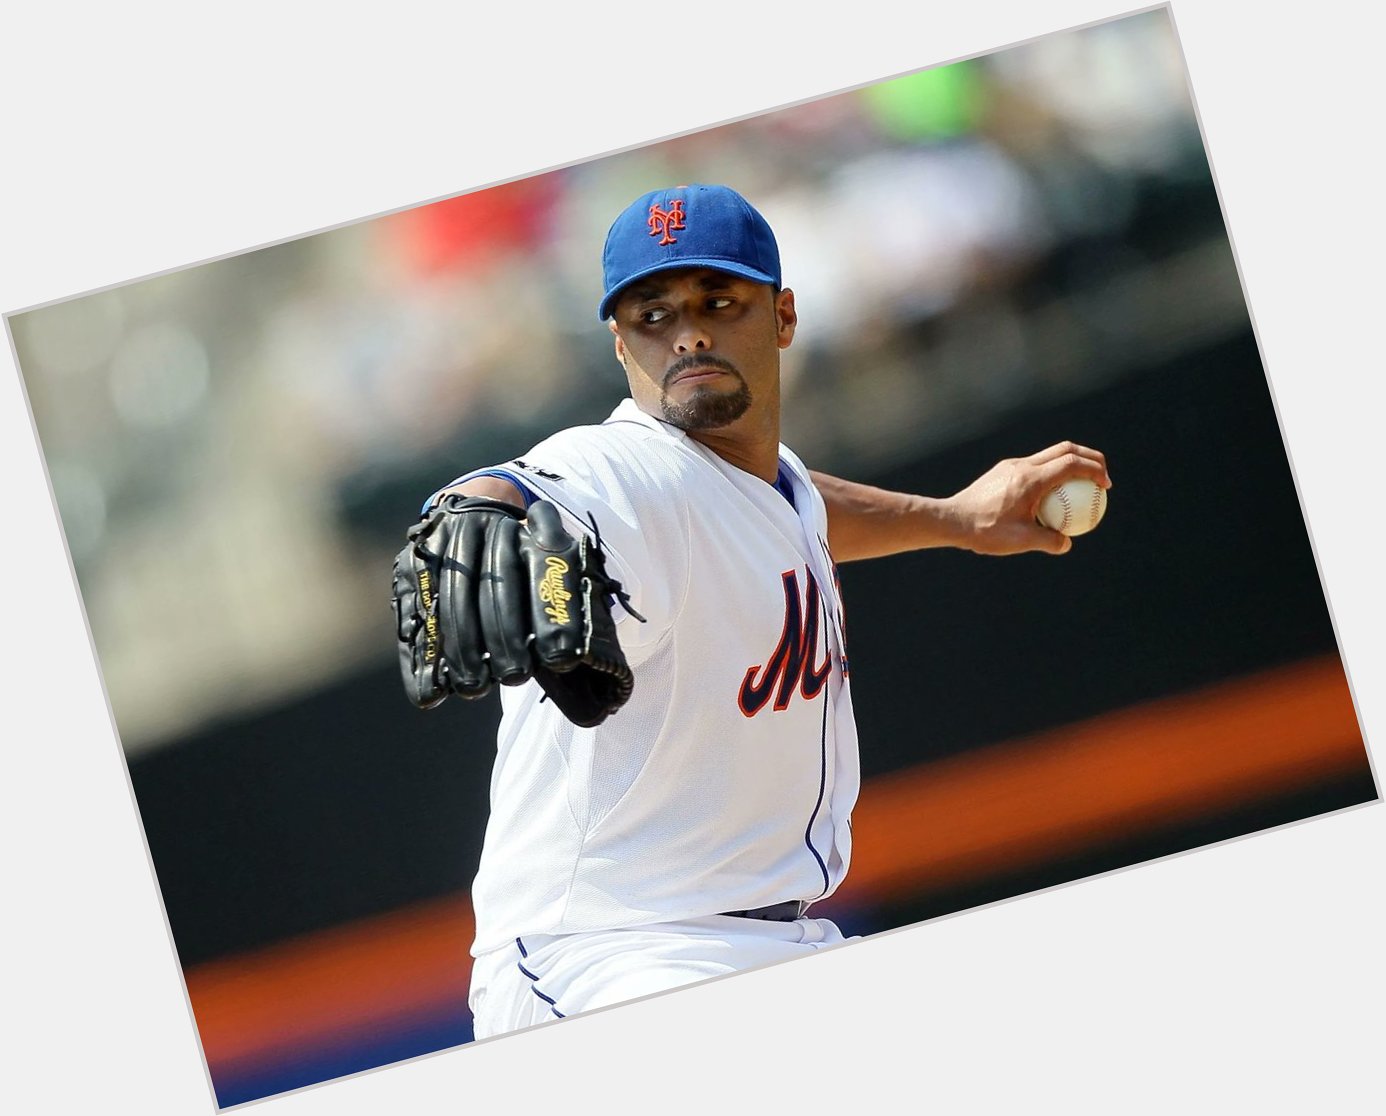 Good Morning fans! It s Monday, March 13. Happy Birthday to Johan Santana (44) and Terry Leach (69). 